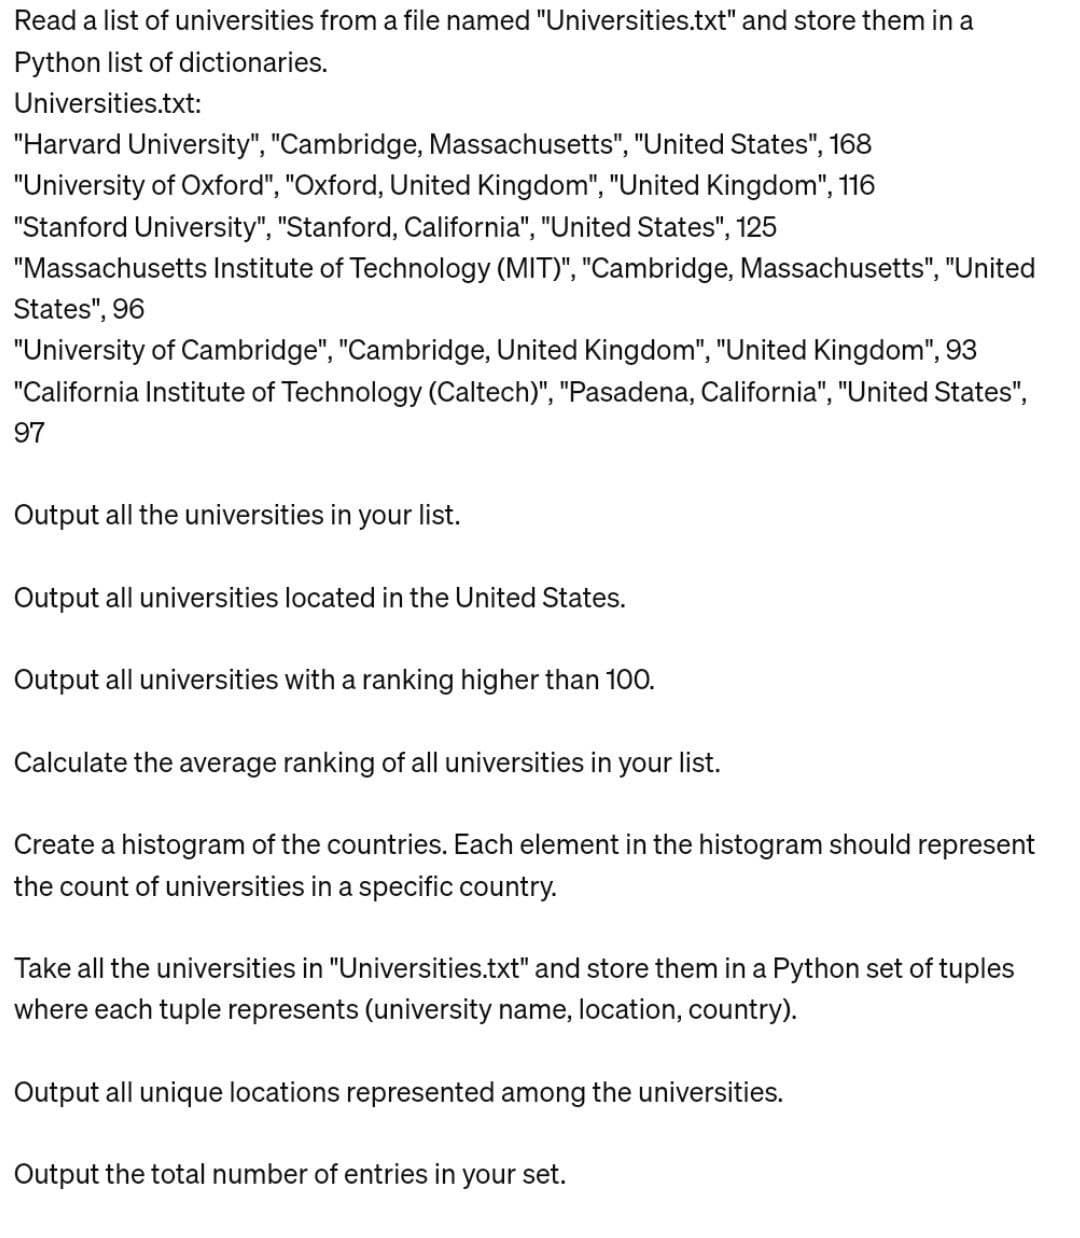 Read a list of universities from a file named "Universities.txt" and store them in a
Python list of dictionaries.
Universities.txt:
"Harvard University", "Cambridge, Massachusetts", "United States", 168
"University of Oxford", "Oxford, United Kingdom", "United Kingdom", 116
"Stanford University", "Stanford, California", "United States", 125
"Massachusetts Institute of Technology (MIT)", "Cambridge, Massachusetts", "United
States", 96
"University of Cambridge", "Cambridge, United Kingdom", "United Kingdom", 93
"California Institute of Technology (Caltech)", "Pasadena, California", "United States",
97
Output all the universities in your list.
Output all universities located in the United States.
Output all universities with a ranking higher than 100.
Calculate the average ranking of all universities in your list.
Create a histogram of the countries. Each element in the histogram should represent
the count of universities in a specific country.
Take all the universities in "Universities.txt" and store them in a Python set of tuples
where each tuple represents (university name, location, country).
Output all unique locations represented among the universities.
Output the total number of entries in your set.